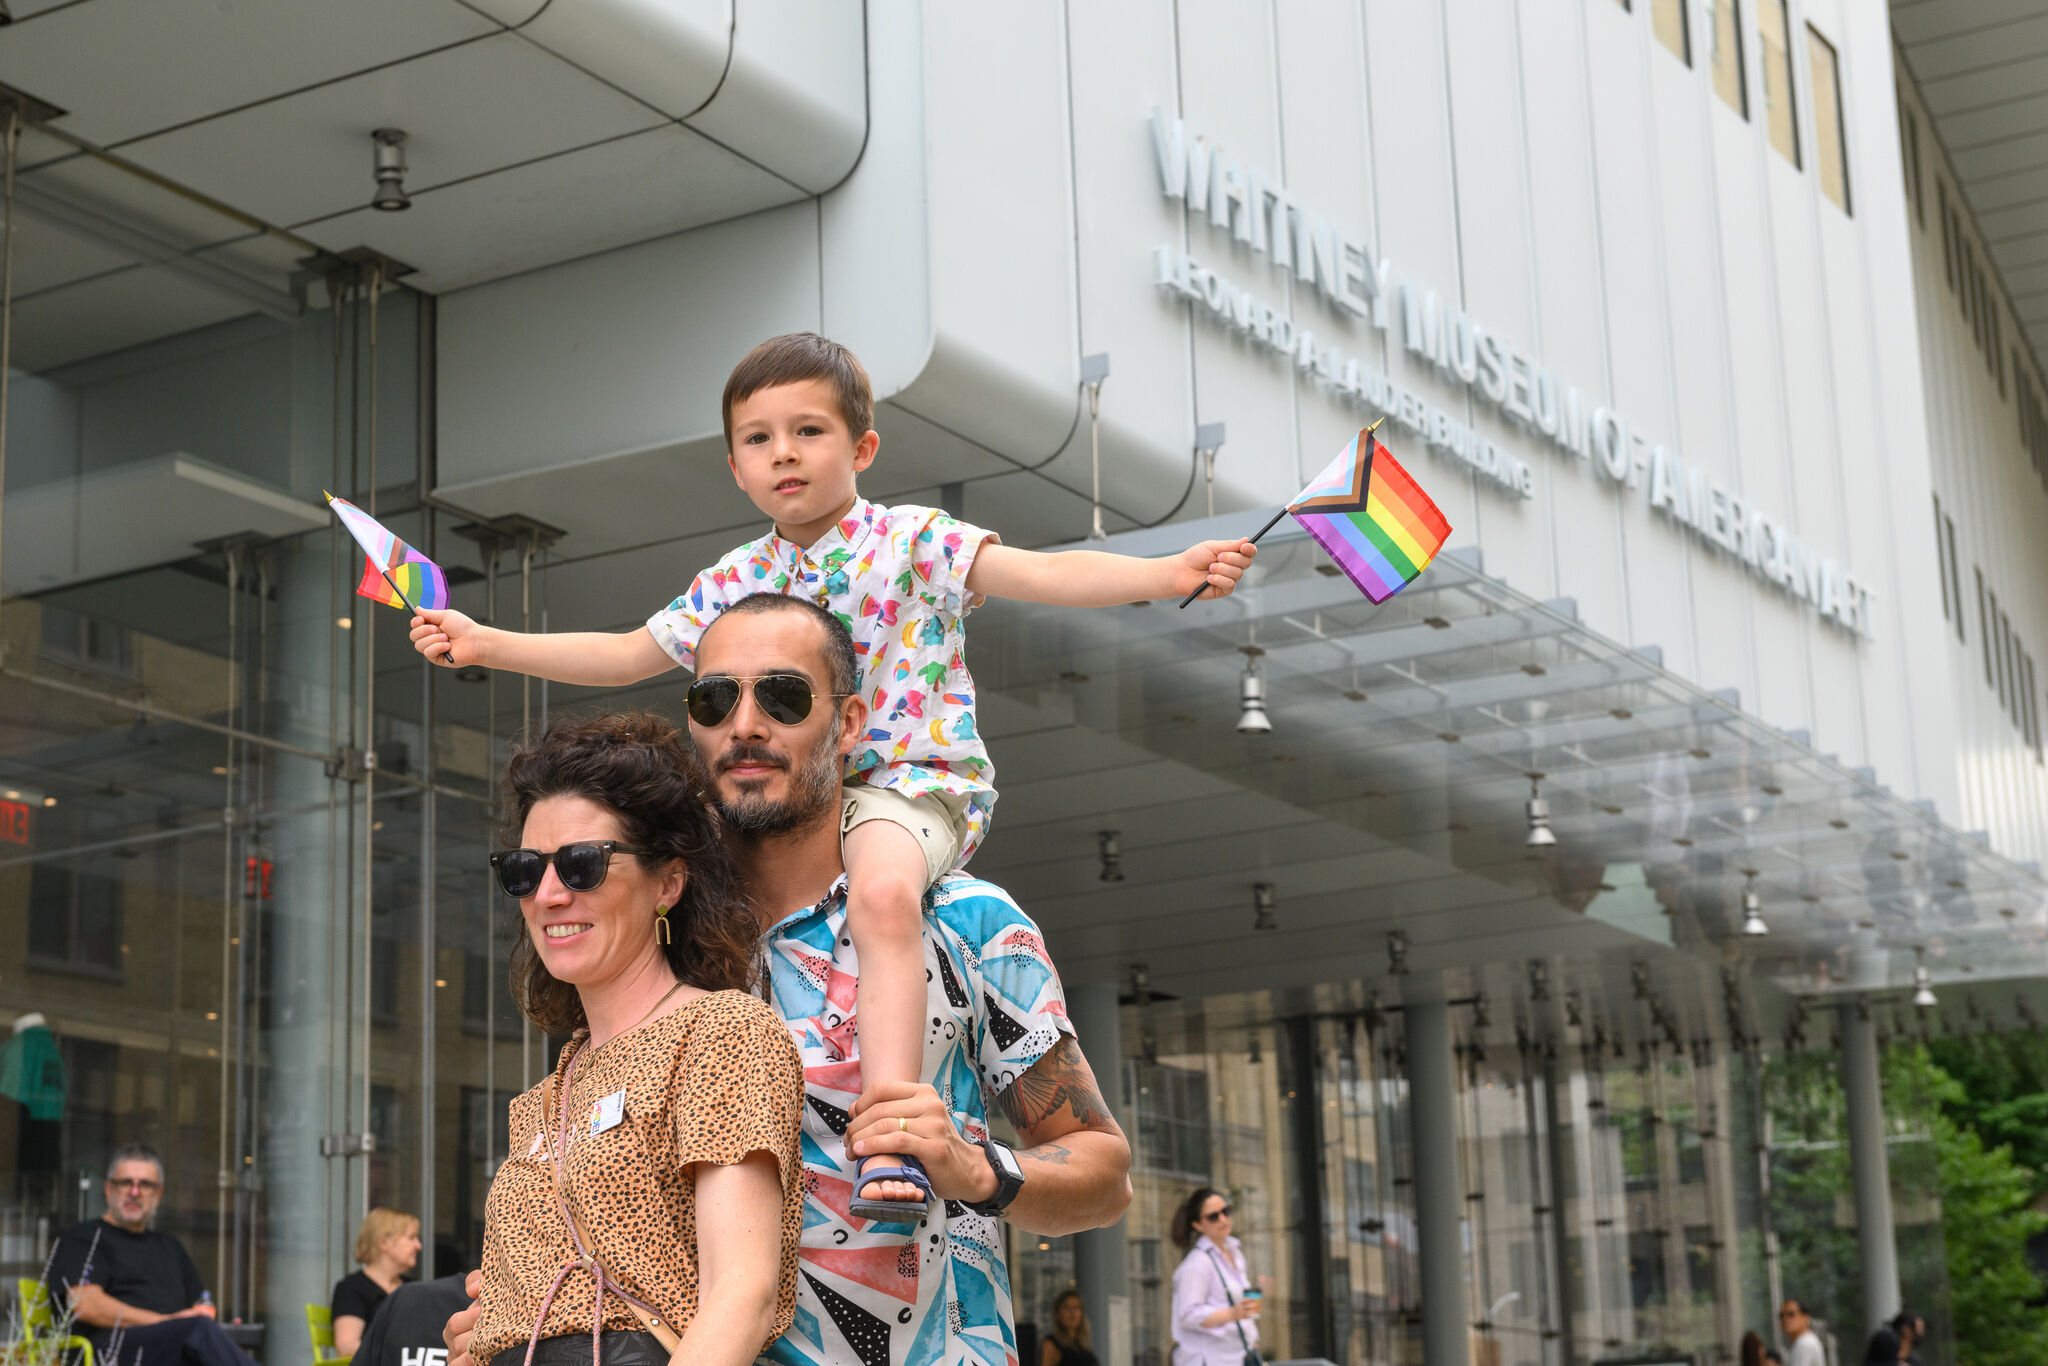 Two parents in front of the Whitney's entrance. One of them has a child holding Pride flags on their shoulders.